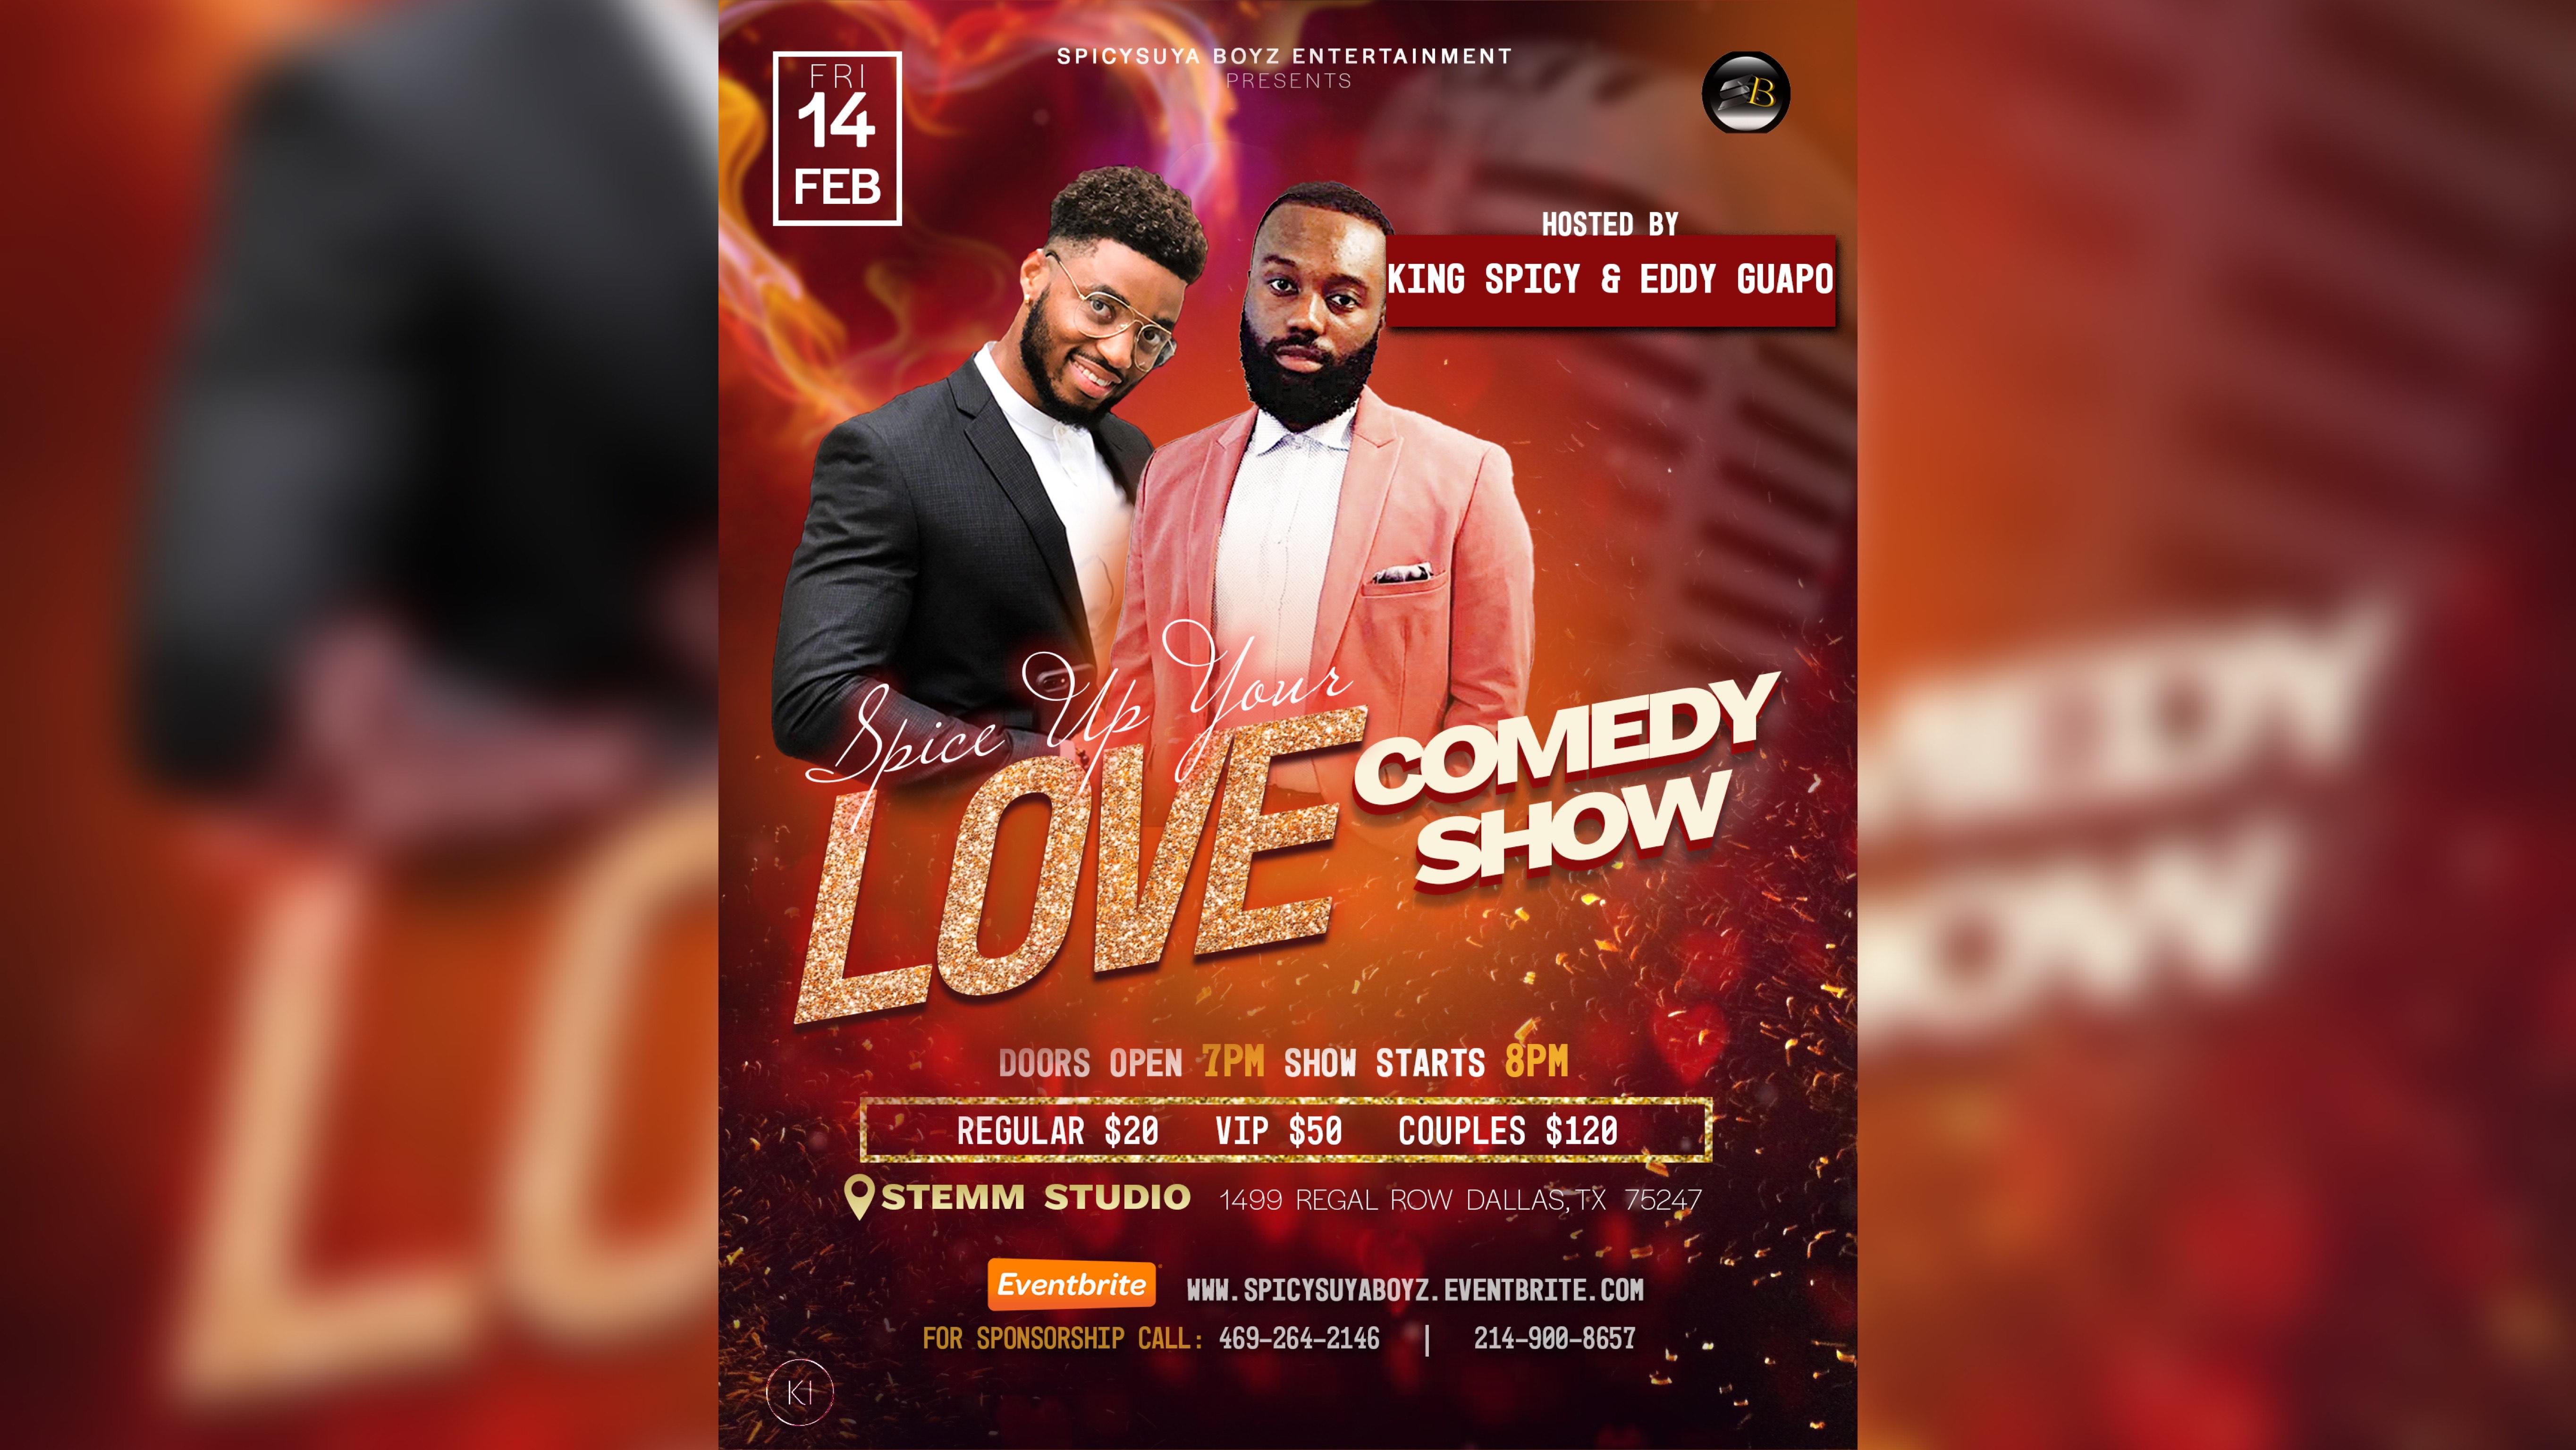 SPICE UP YOUR LOVE COMEDY SHOW